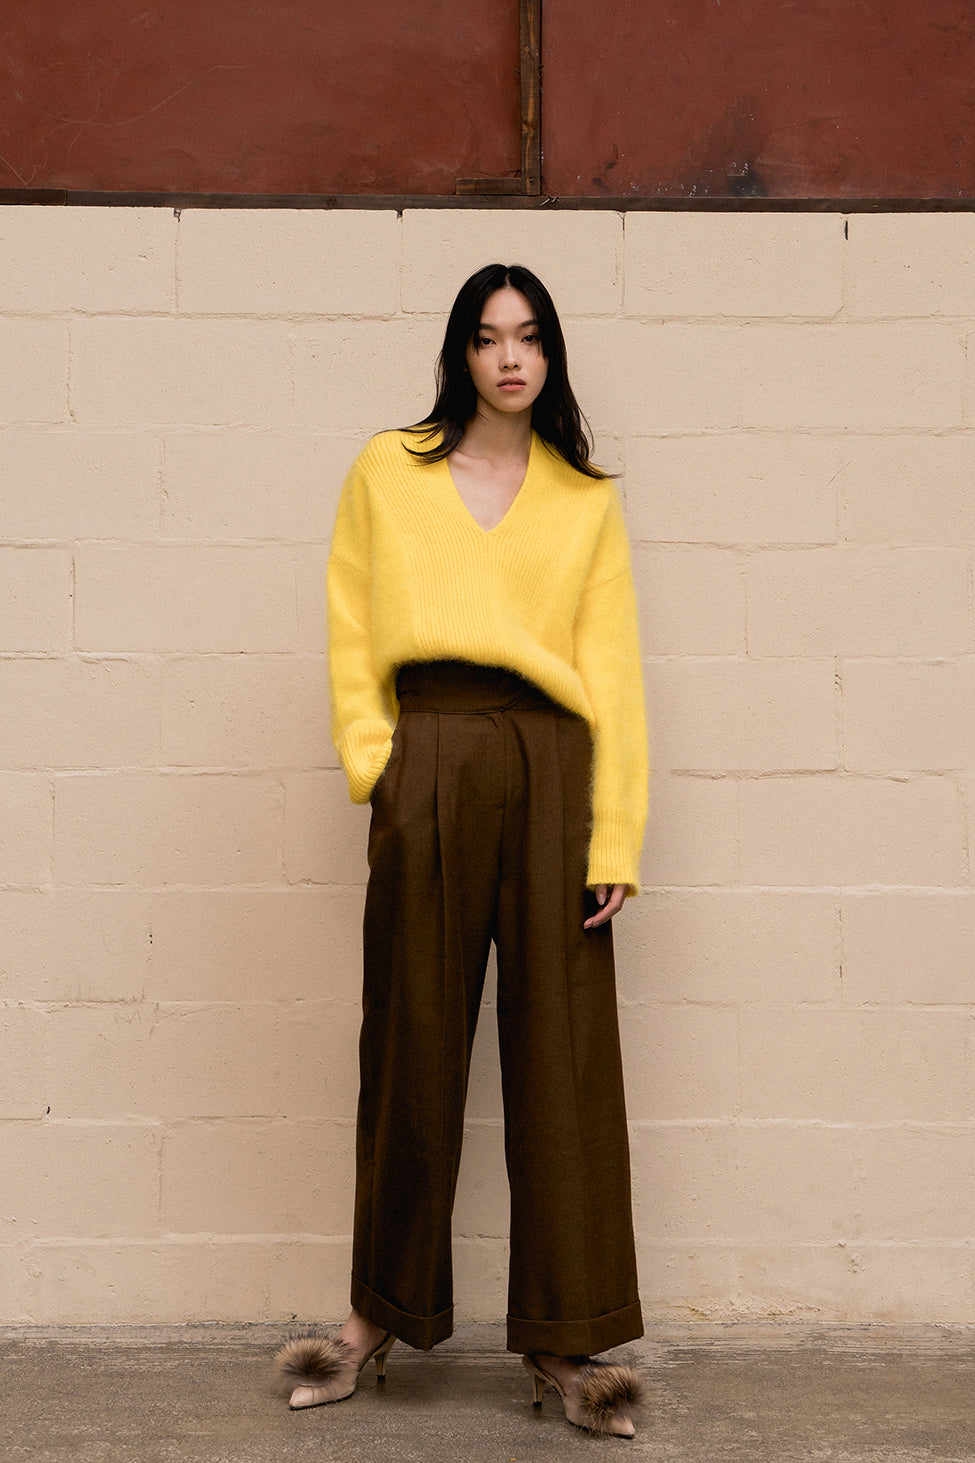 The Heiko pant featuring high rise, zip fly with hook-and-bar closure, non-removable coordinating belts along side. Front slash pockets. Folded hem. Wide leg. Straight fit.